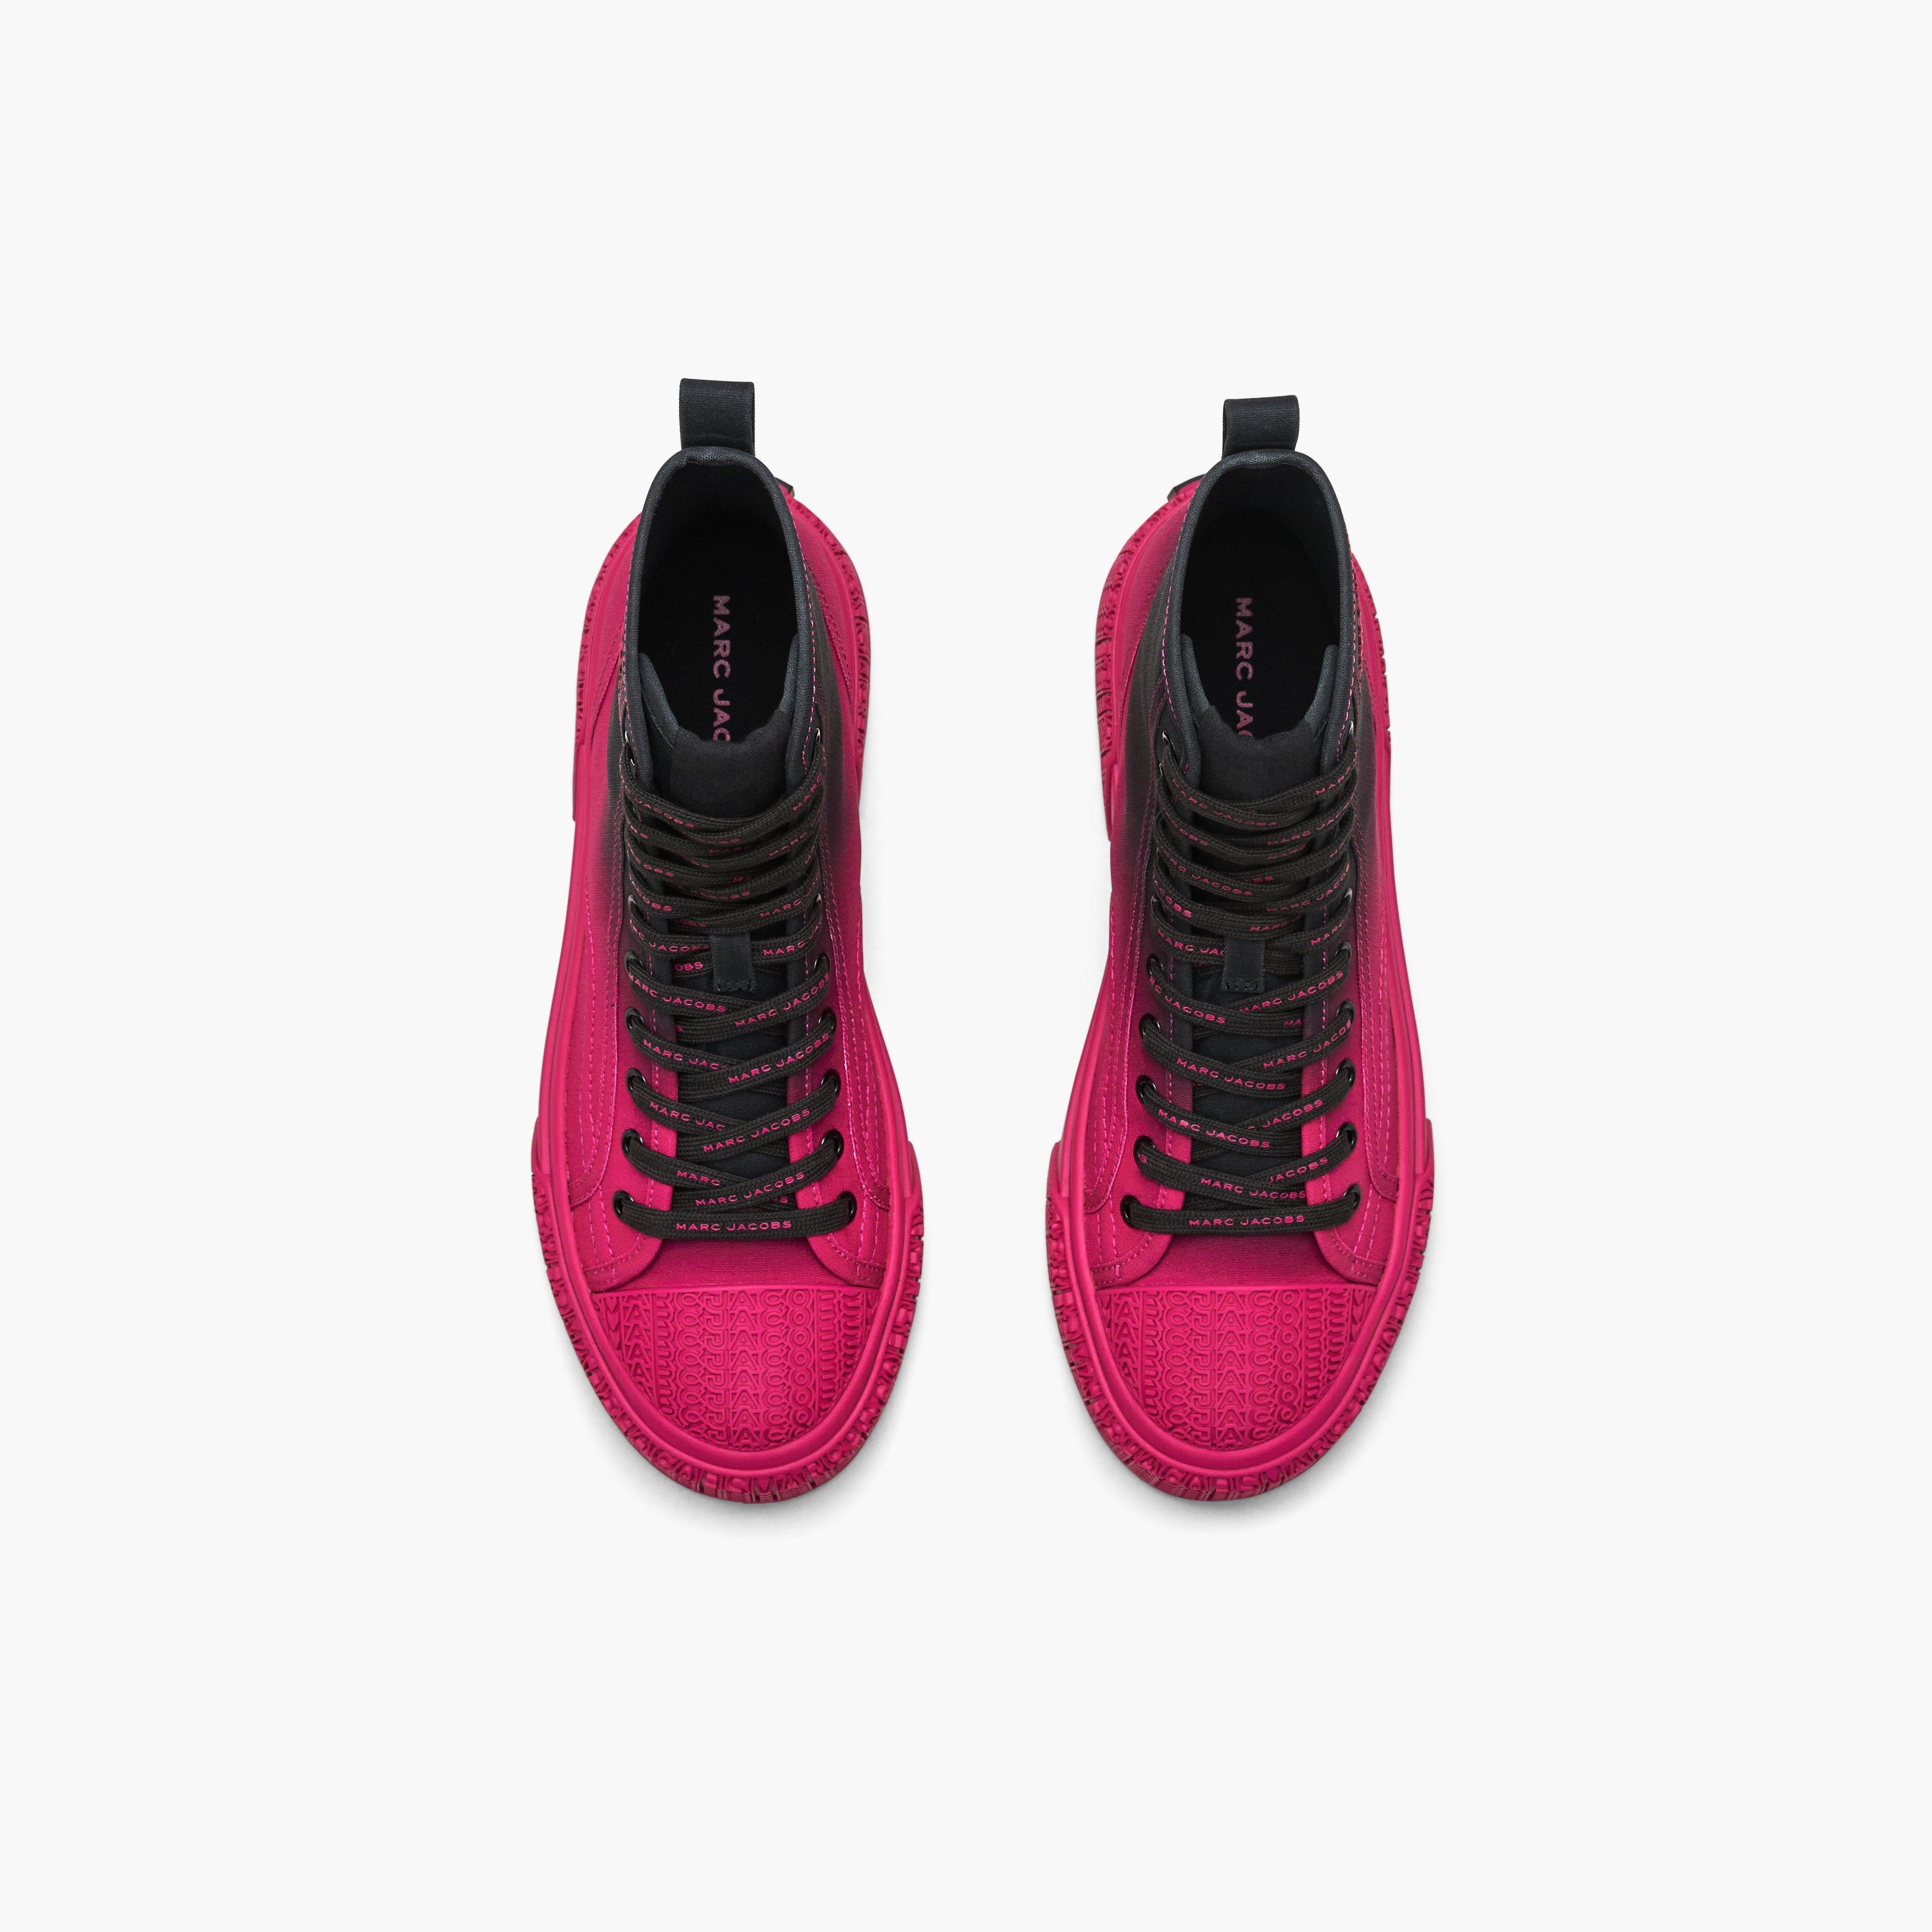 THE OMBRE HIGH TOP SNEAKER - 8